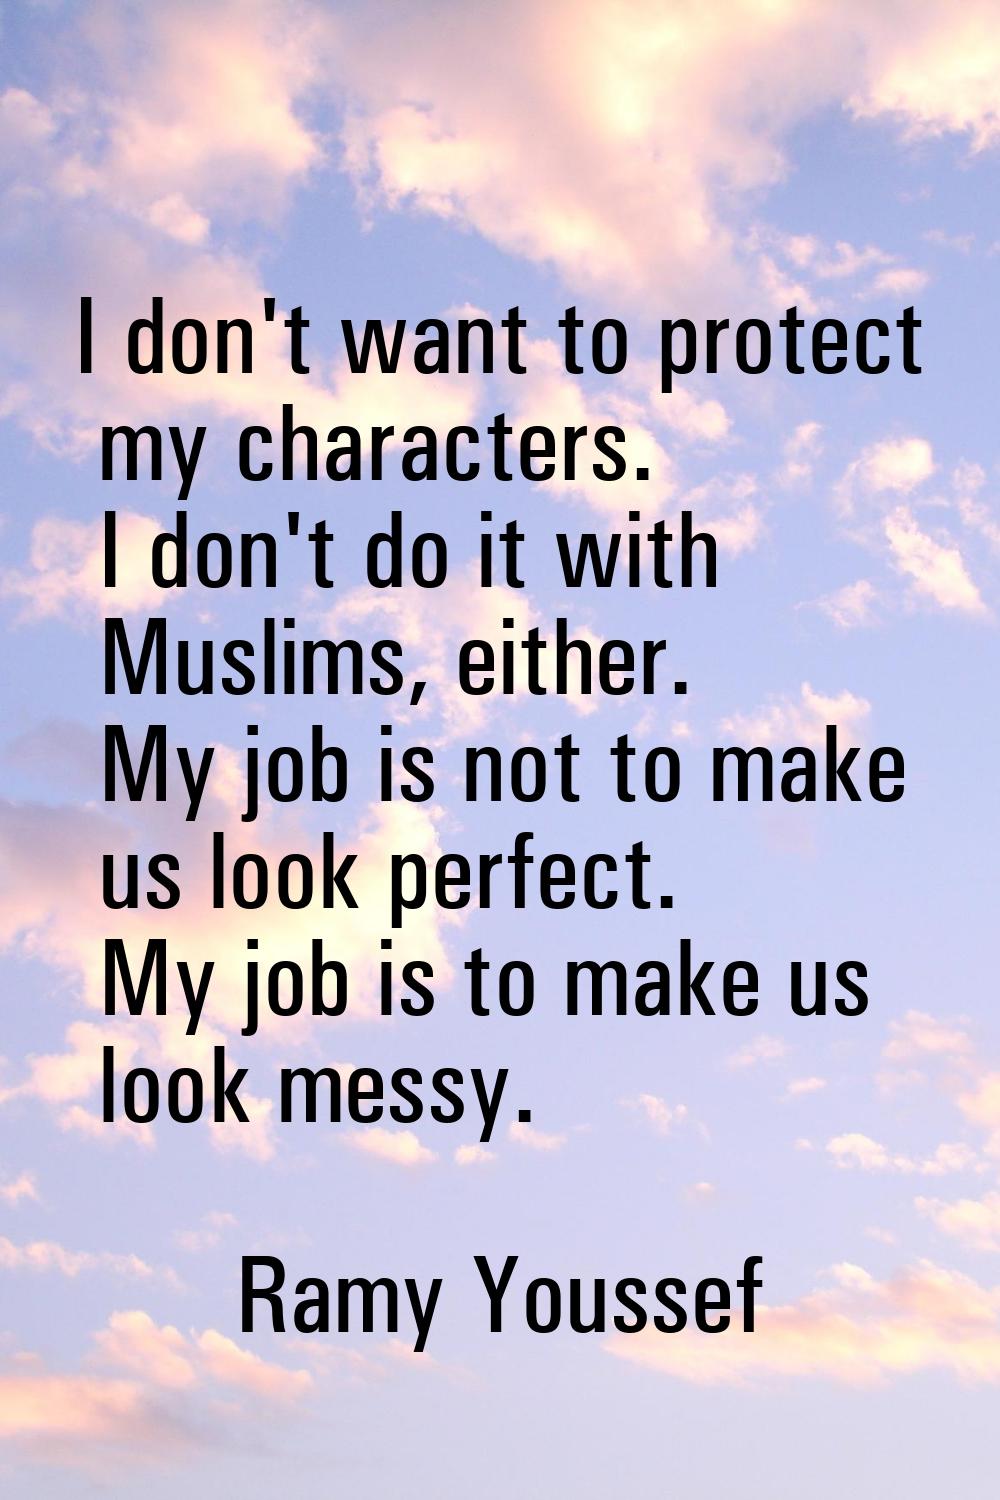 I don't want to protect my characters. I don't do it with Muslims, either. My job is not to make us